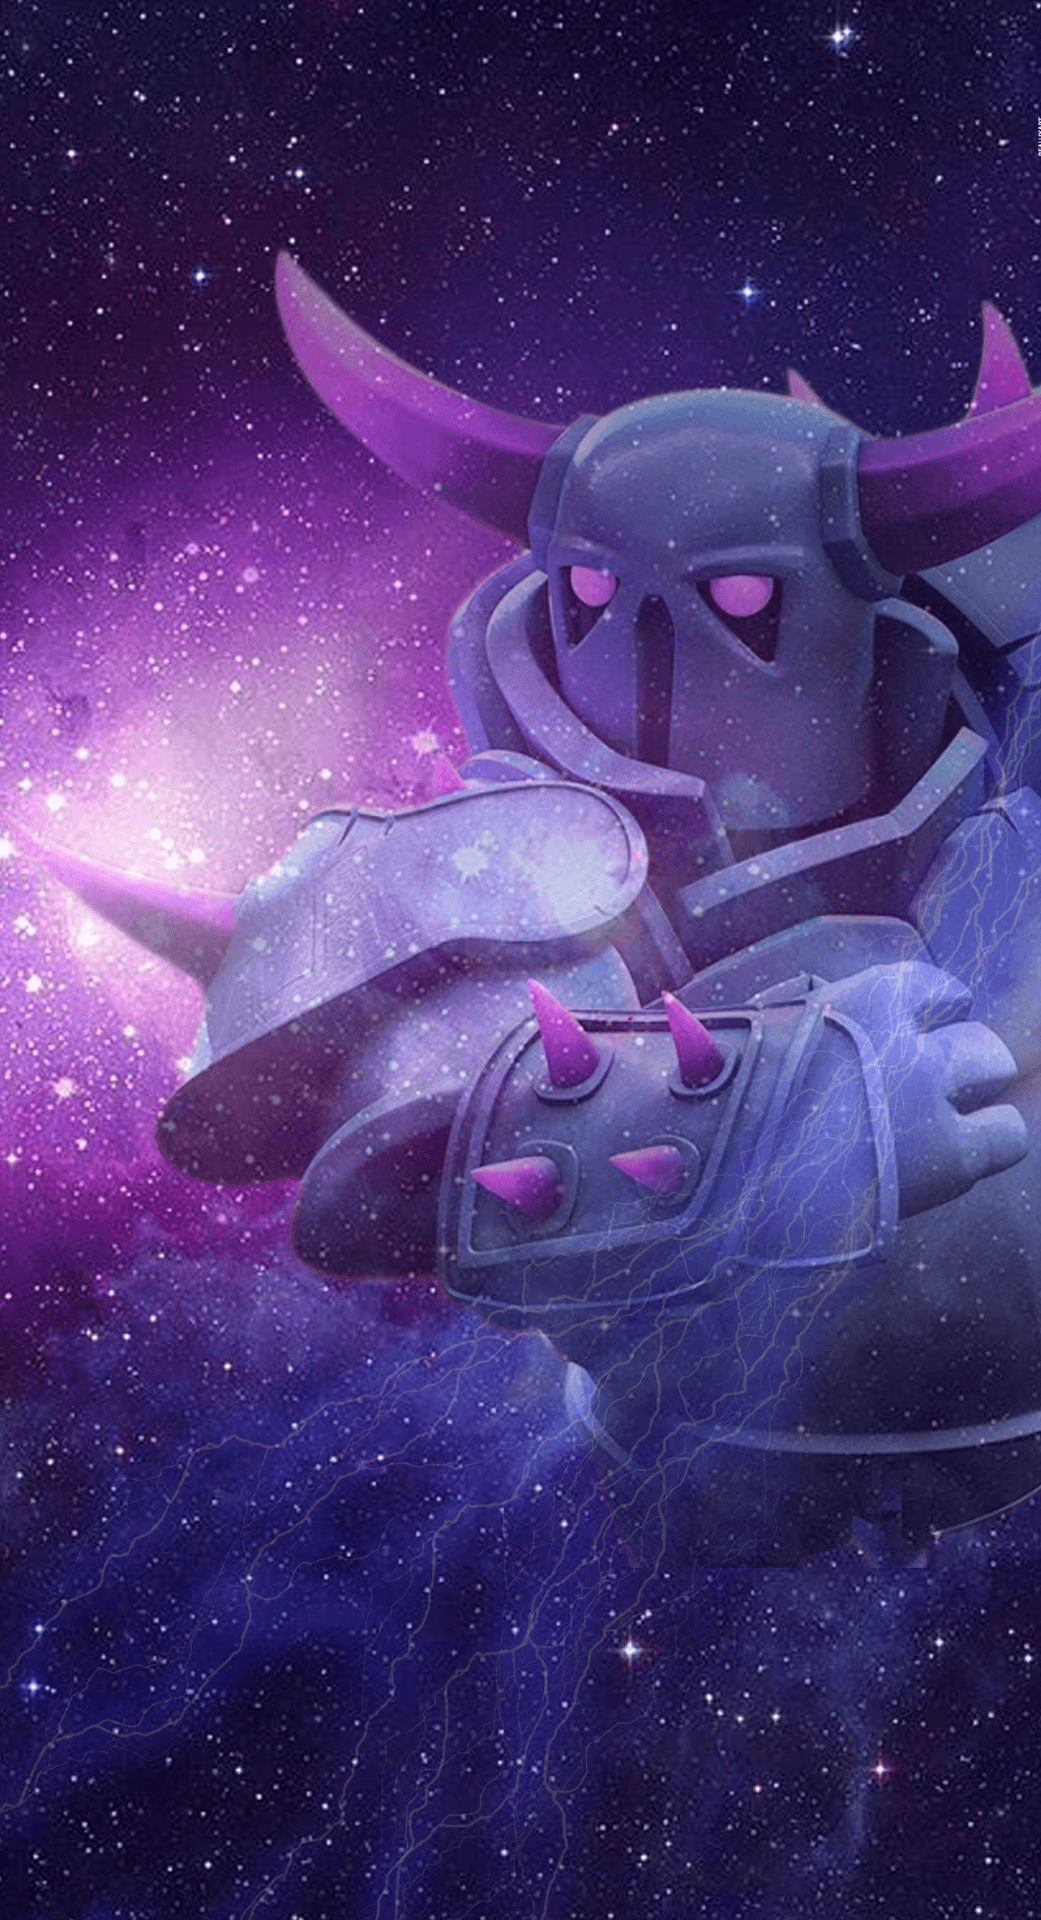 A Purple And Purple Horned Creature In Space